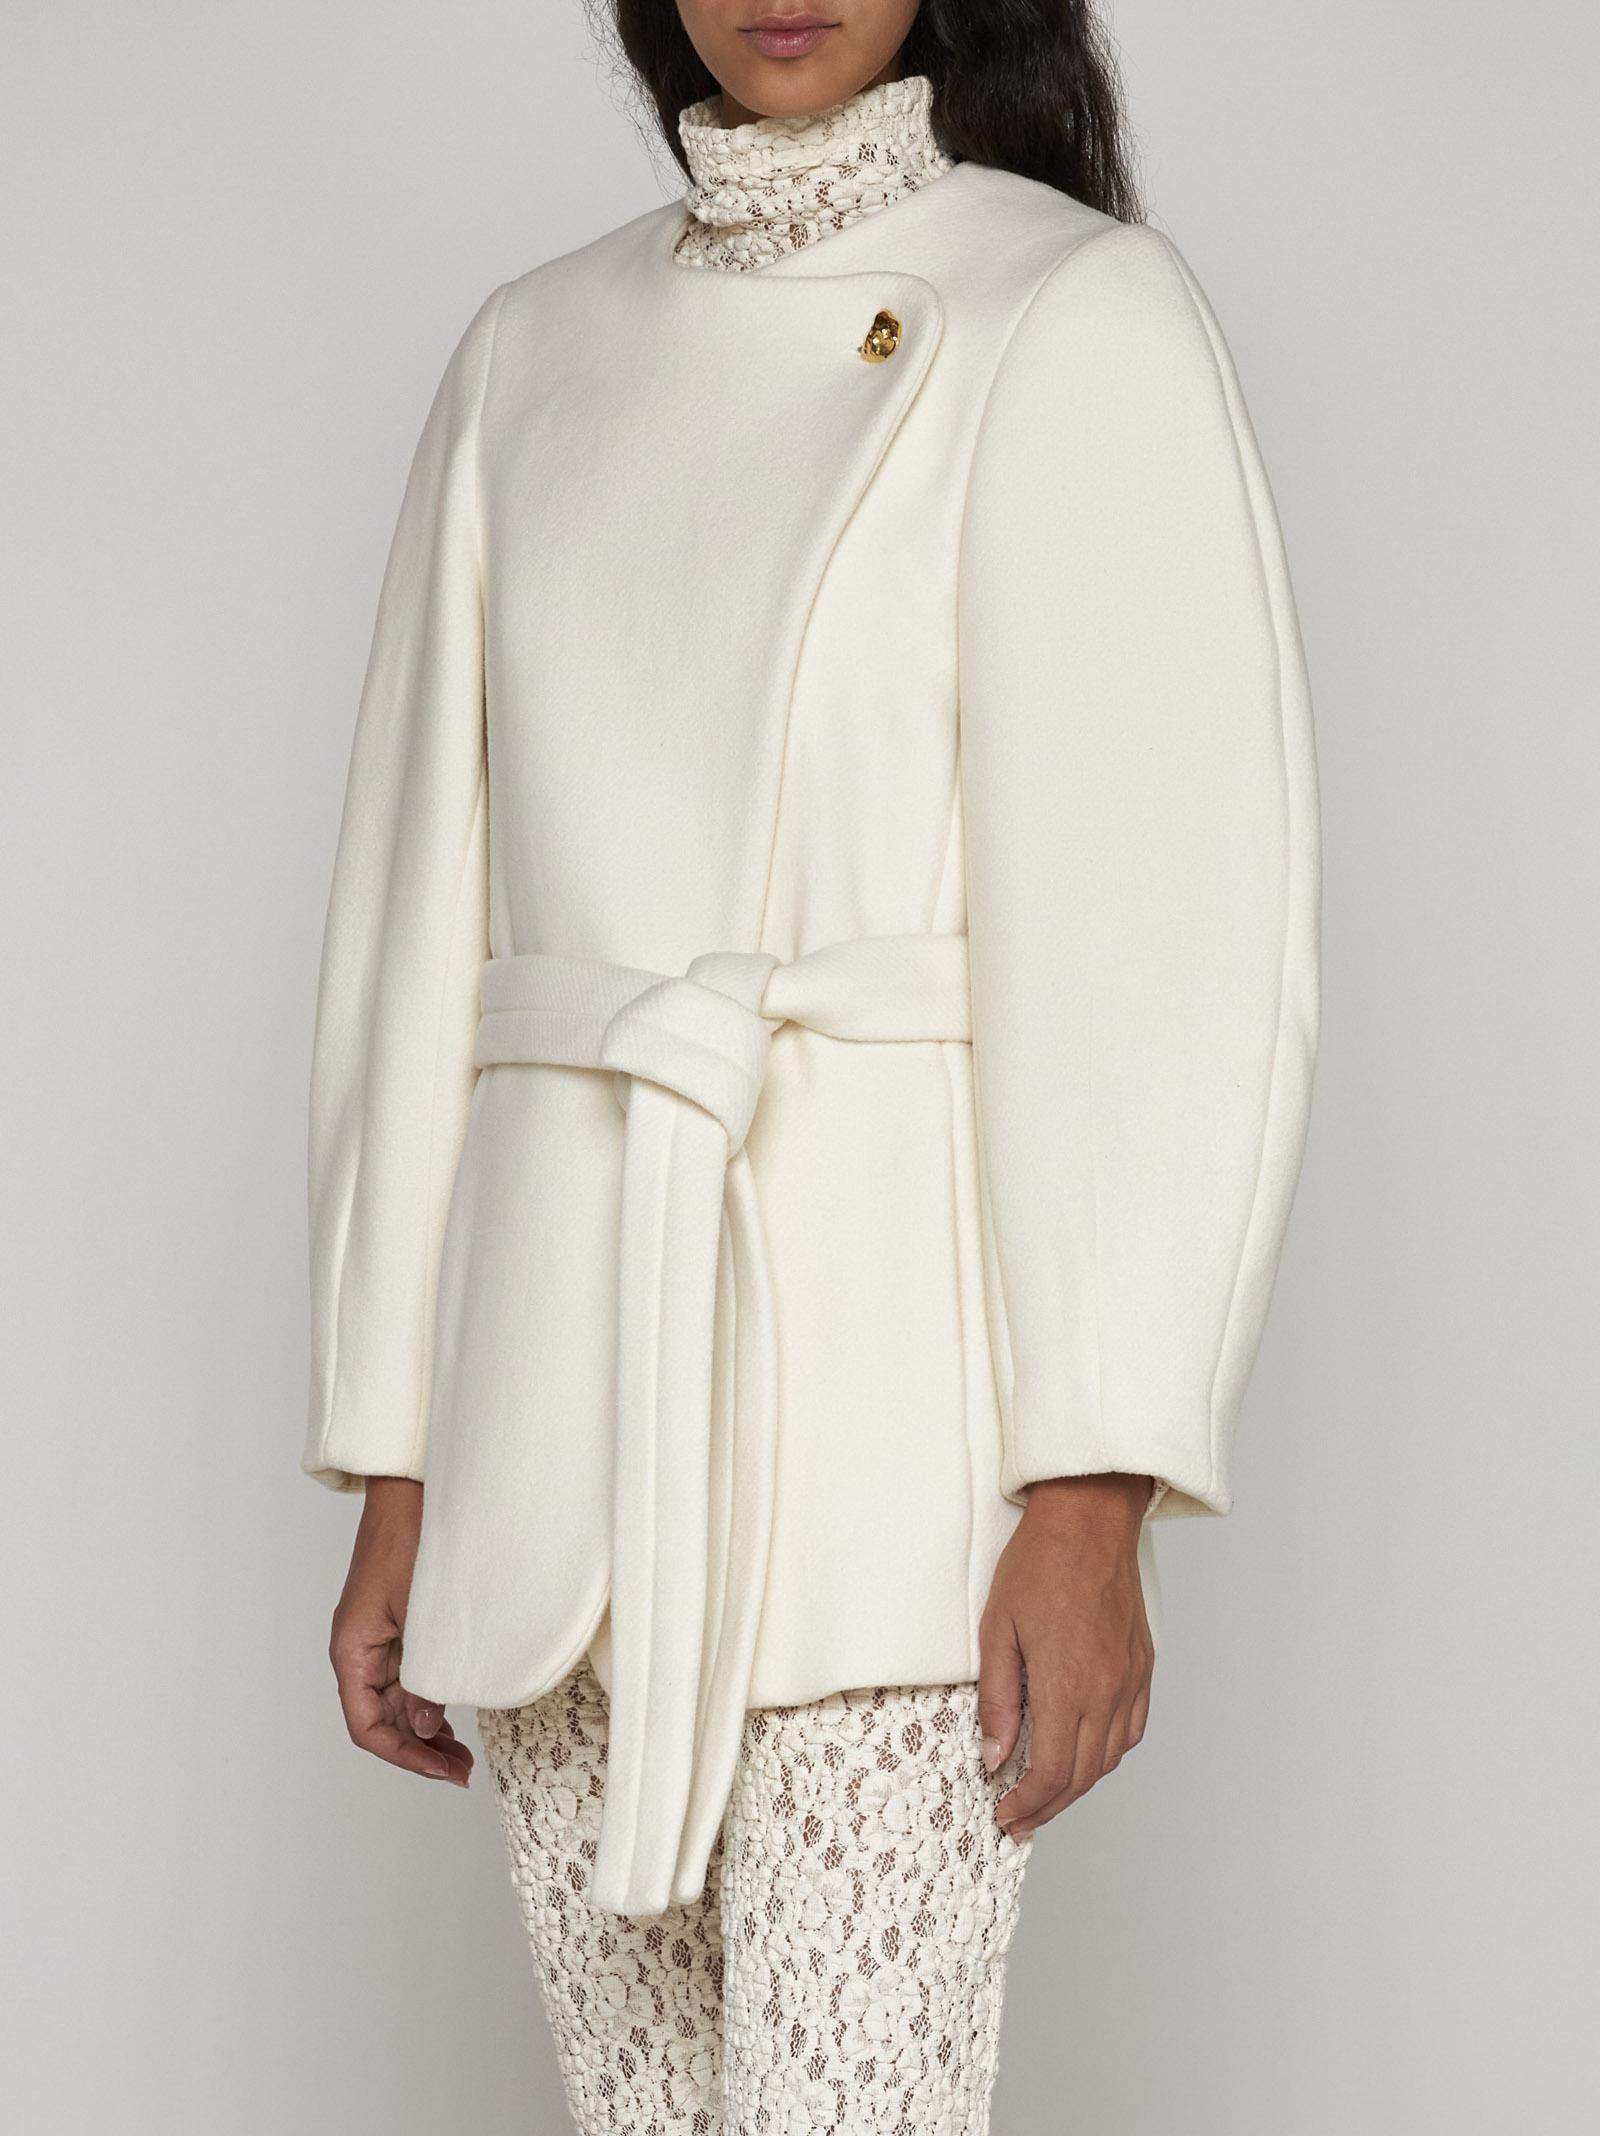 Chloé Belted Wool Short Coat in White | Lyst